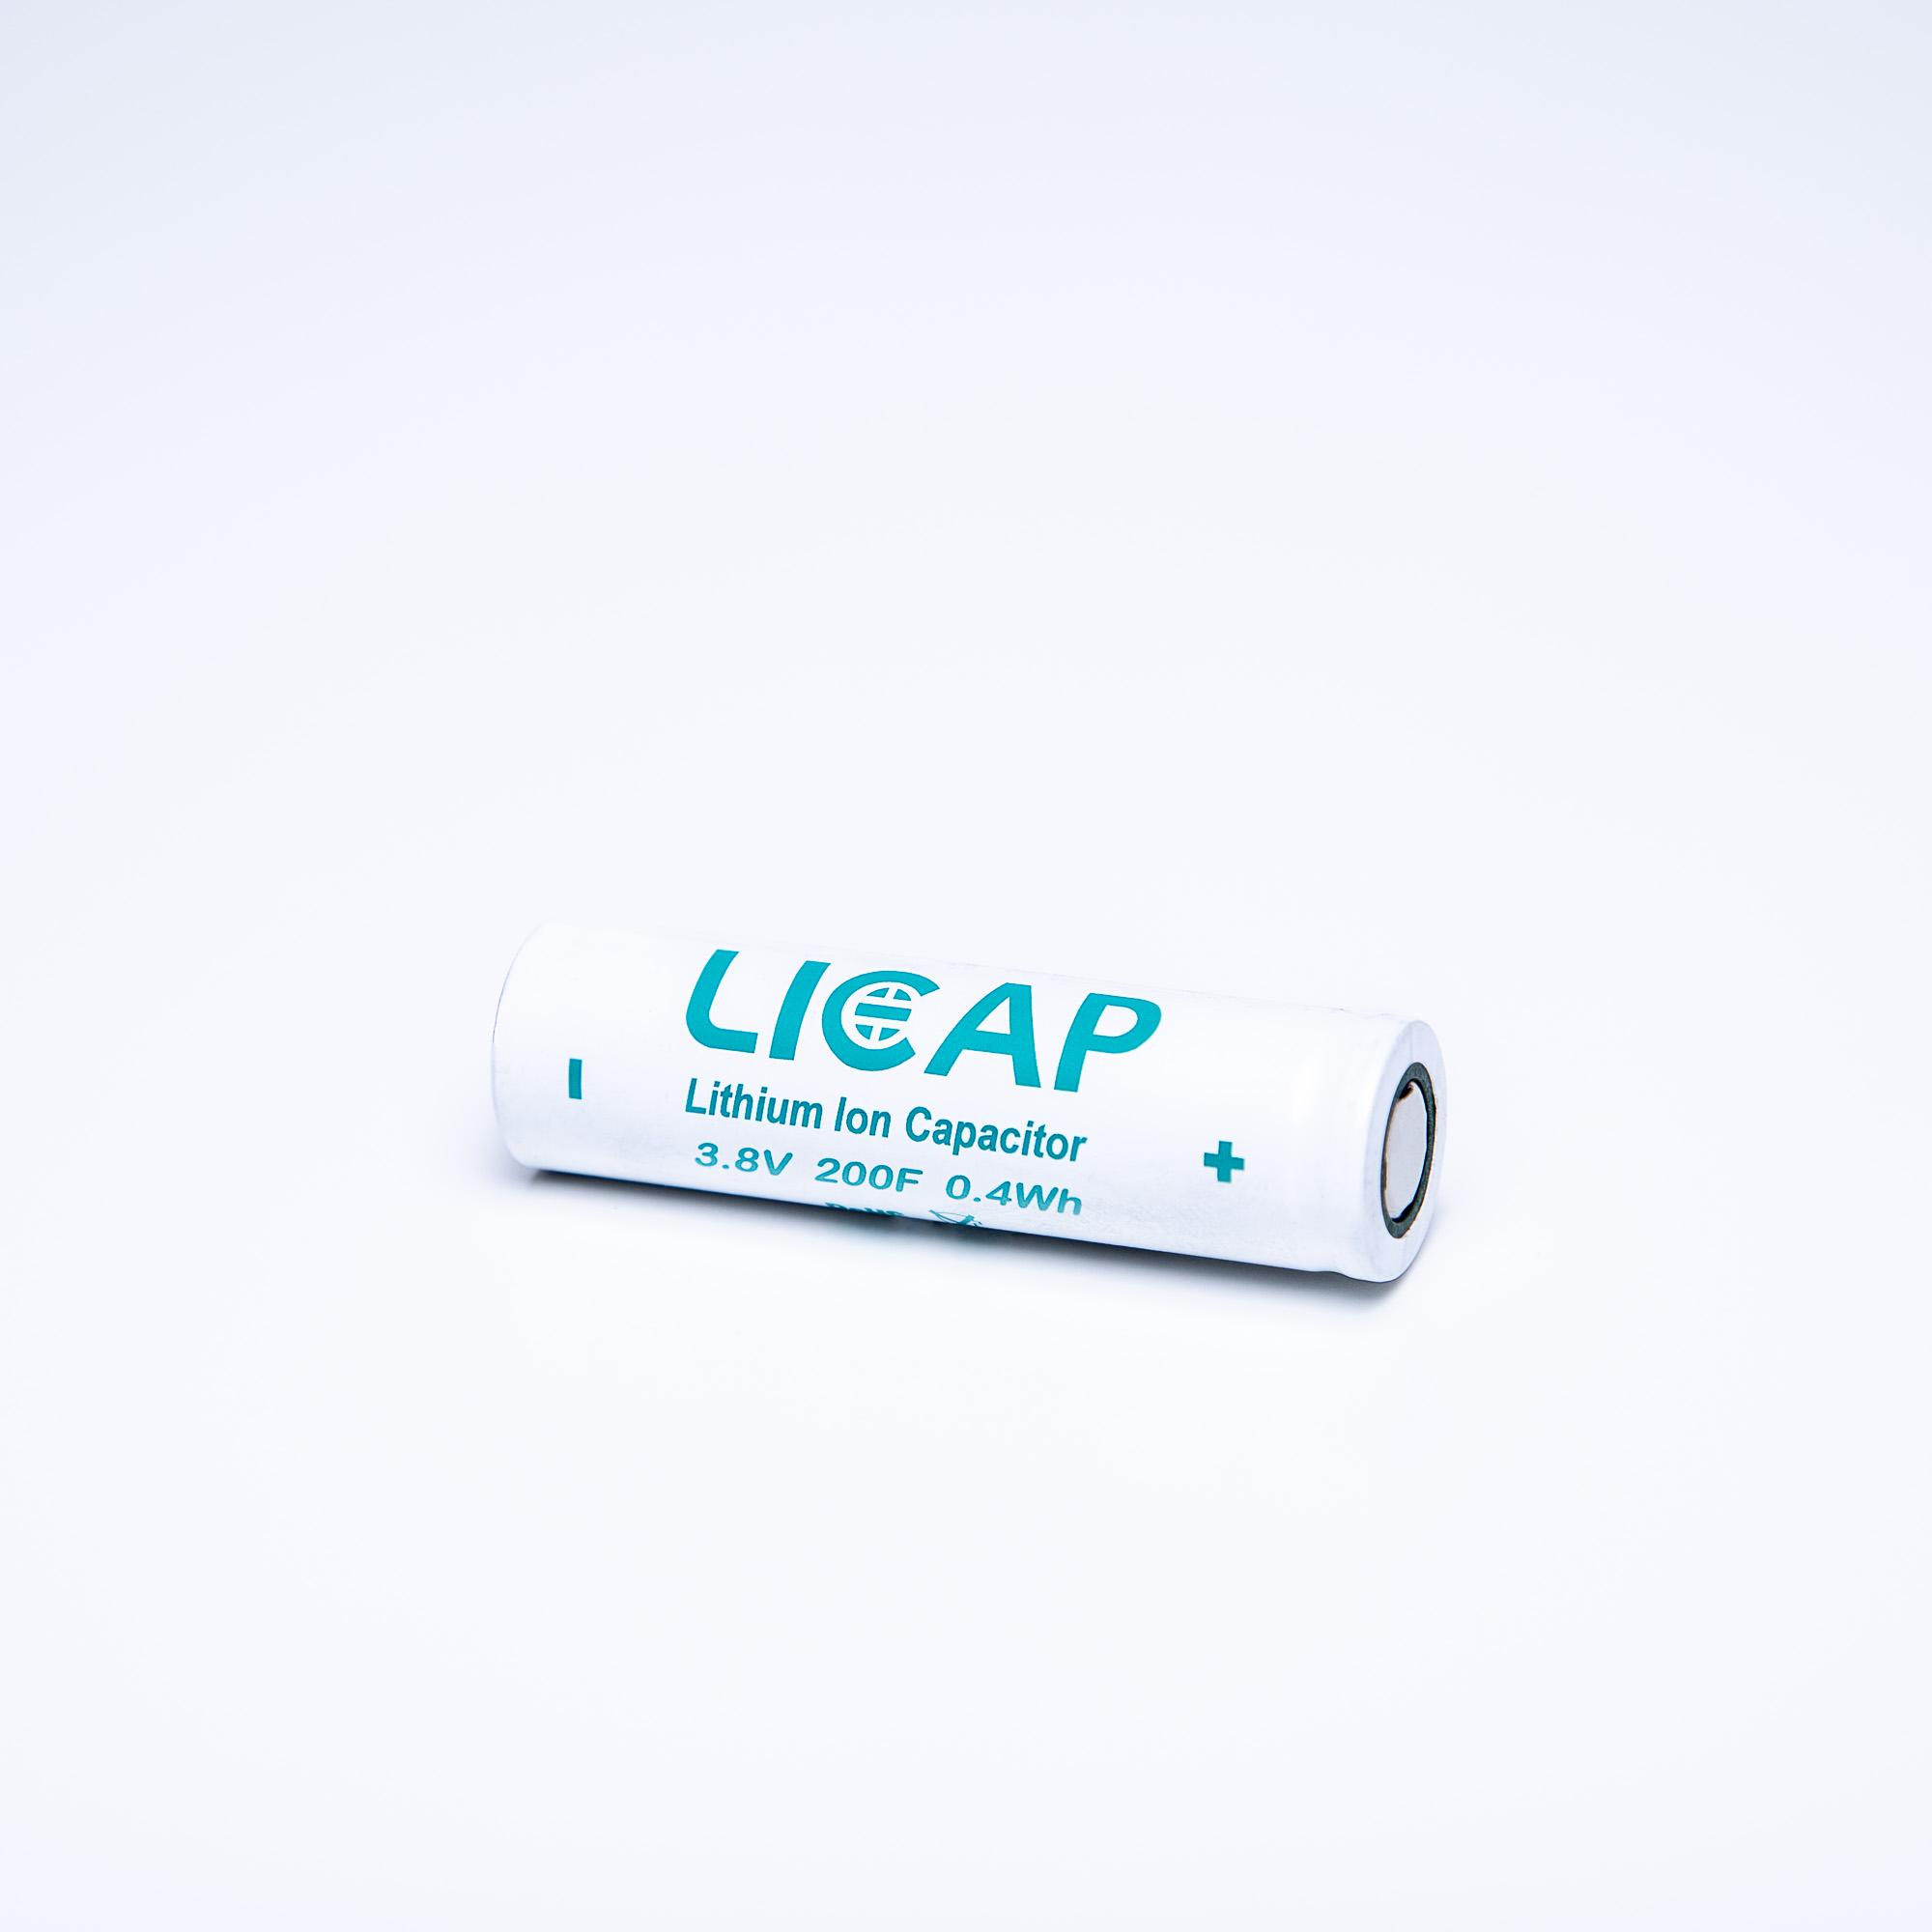 Product 3.8V, 200F Lithium Ion Capacitor LICAP Technologies, Inc. - Ultracapacitors, Dry Electrode Technology image